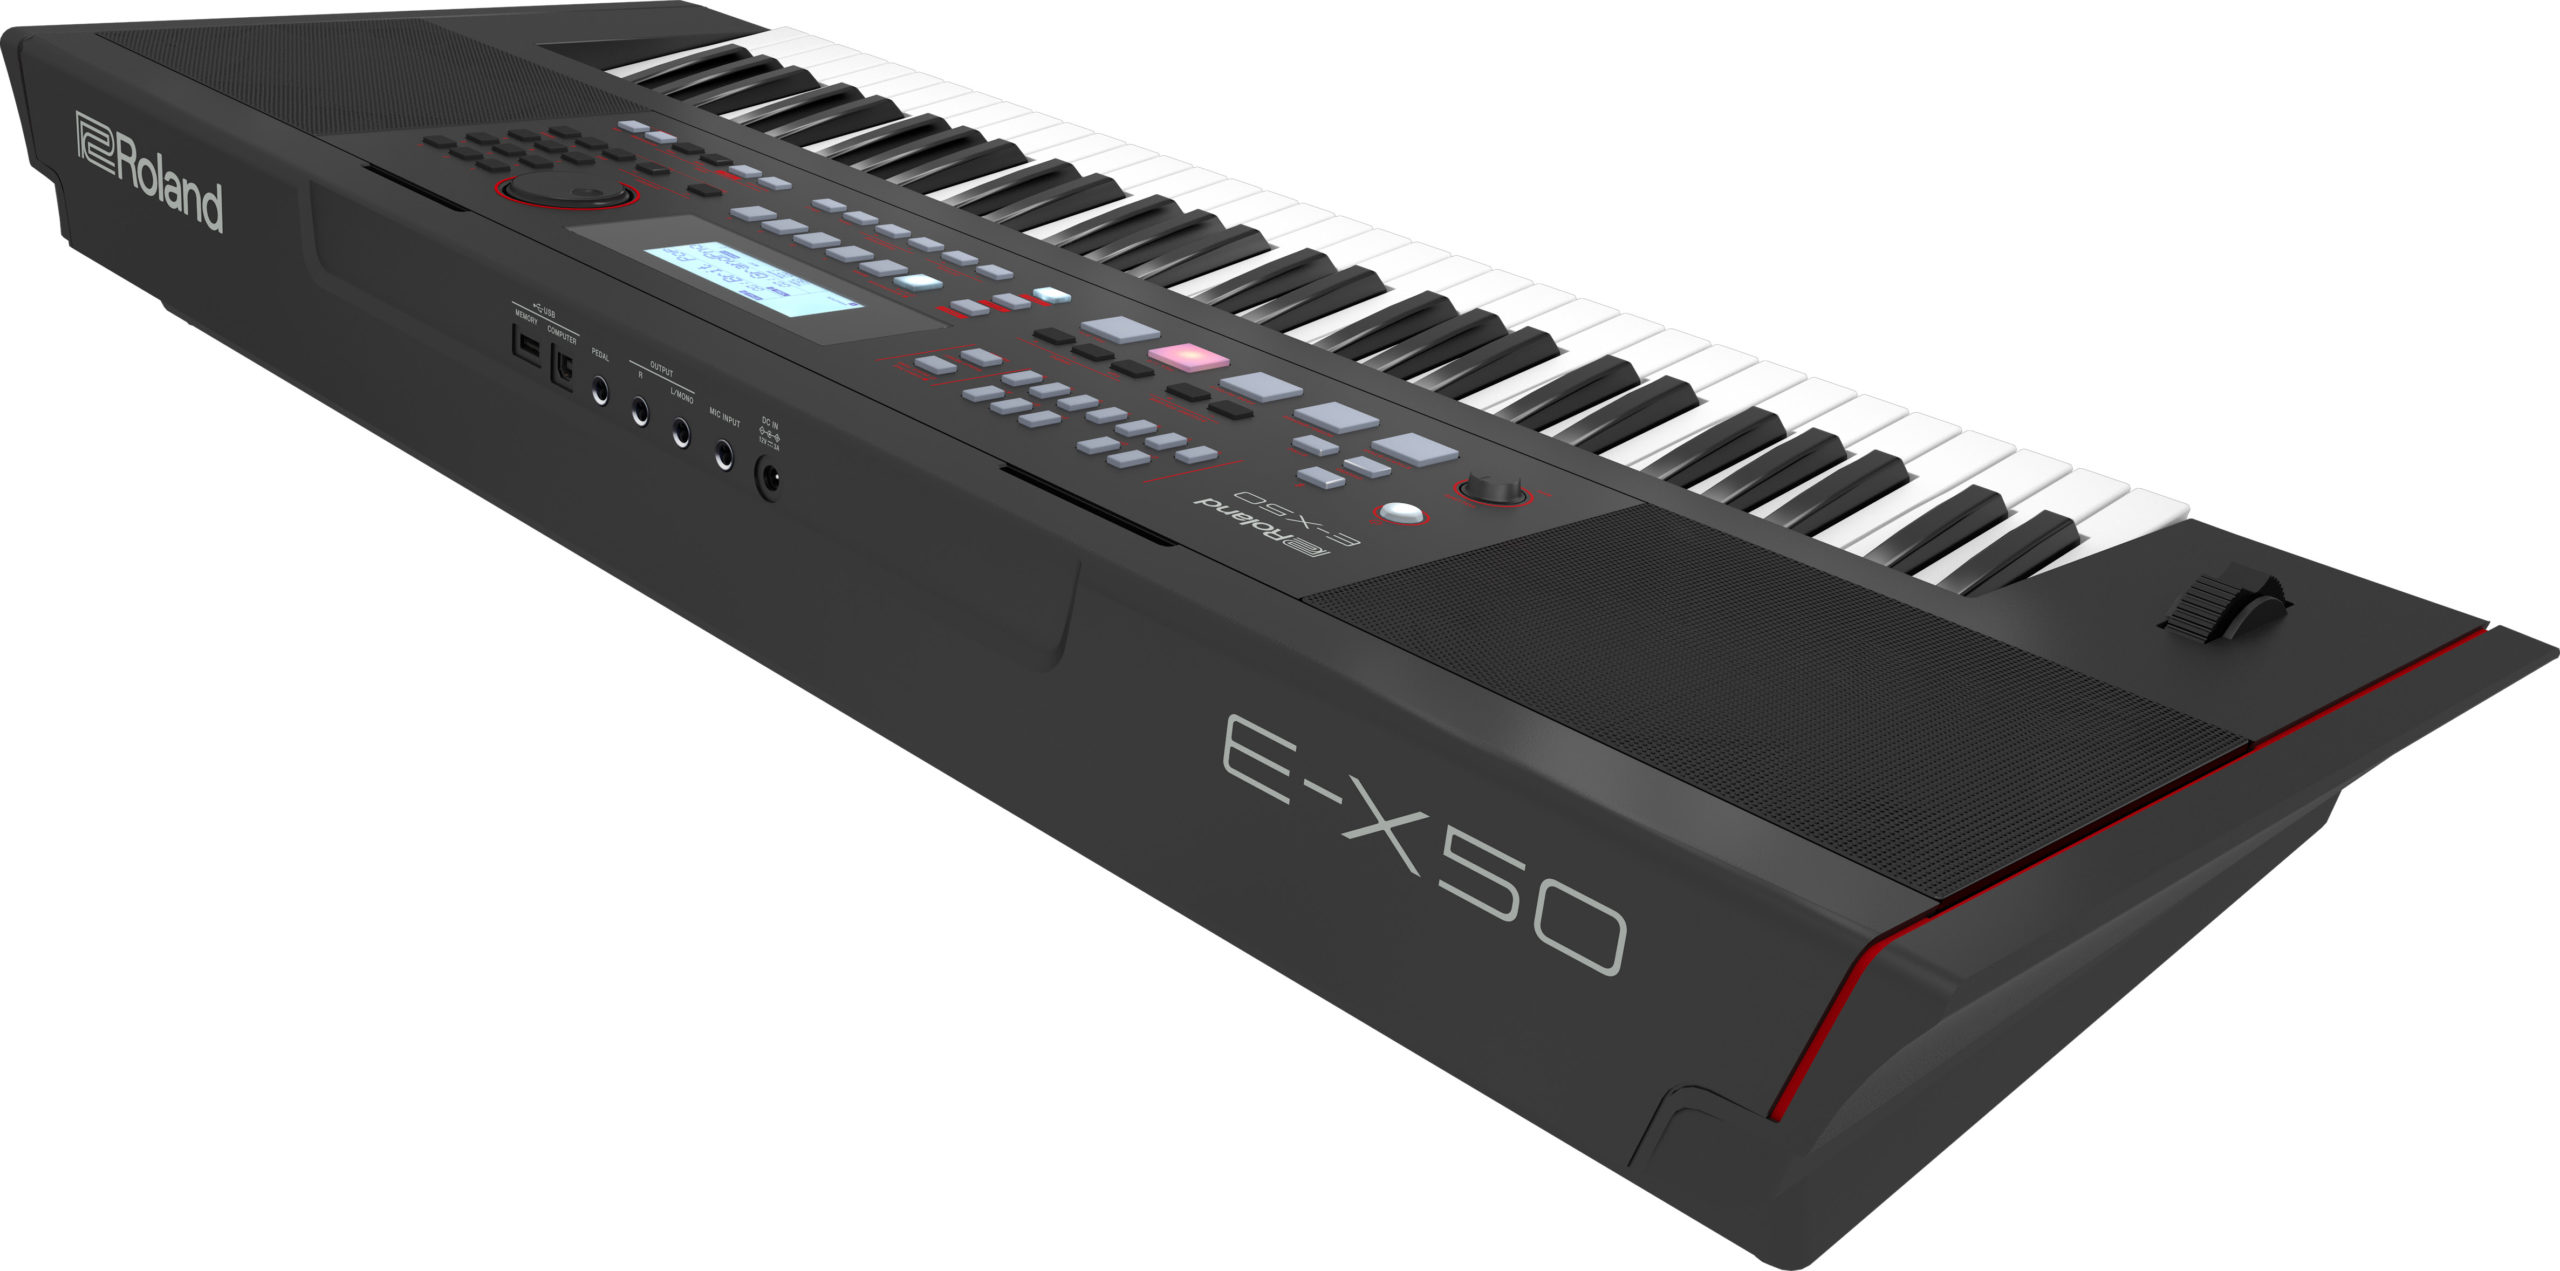 Roland Announces New Keyboard – Music Connection Magazine